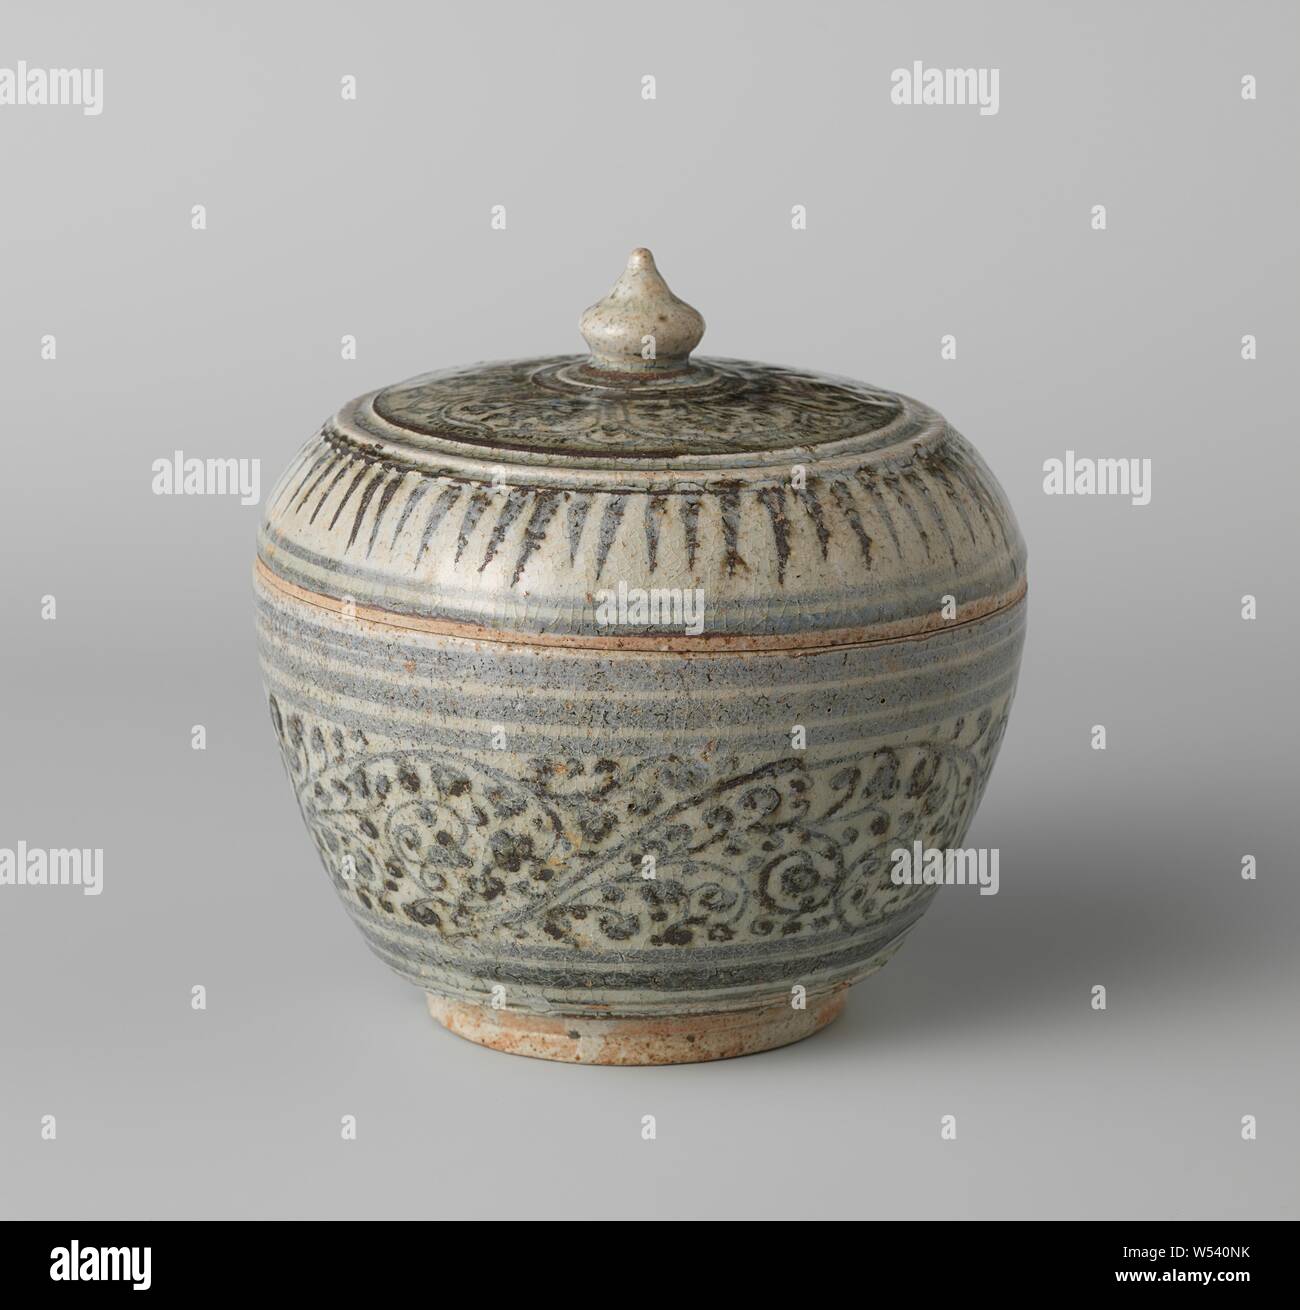 Covered jar with floral scrolls, Lid of stoneware jar, painted in underglaze blue. On the lid a band with petal-shaped compartments with flowering plants. Edge-pointed leaf motifs depending on the edge. The glaze is slightly gray. Blue White., anonymous, Thailand, c. 1700 - c. 1799, stoneware, glaze, cobalt (mineral), vitrification, h 6.3 cm × d 16 cm Stock Photo